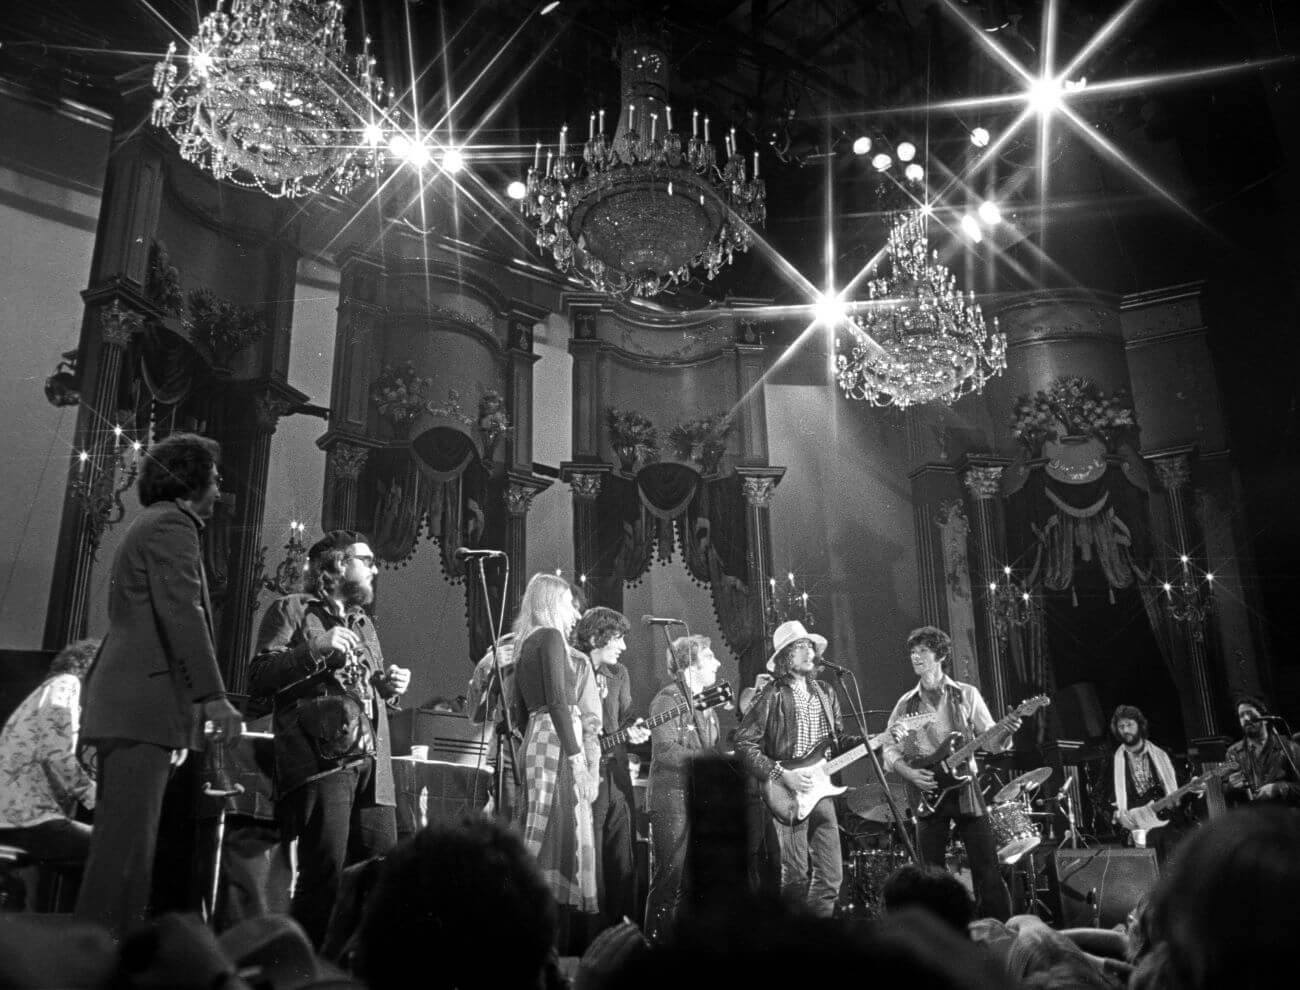 A black and white picture of Bob Dylan onstage with Van Morrison, Joni Mitchell, The Band and other musicians in Martin Scorsese's music documentary 'The Last Waltz.'